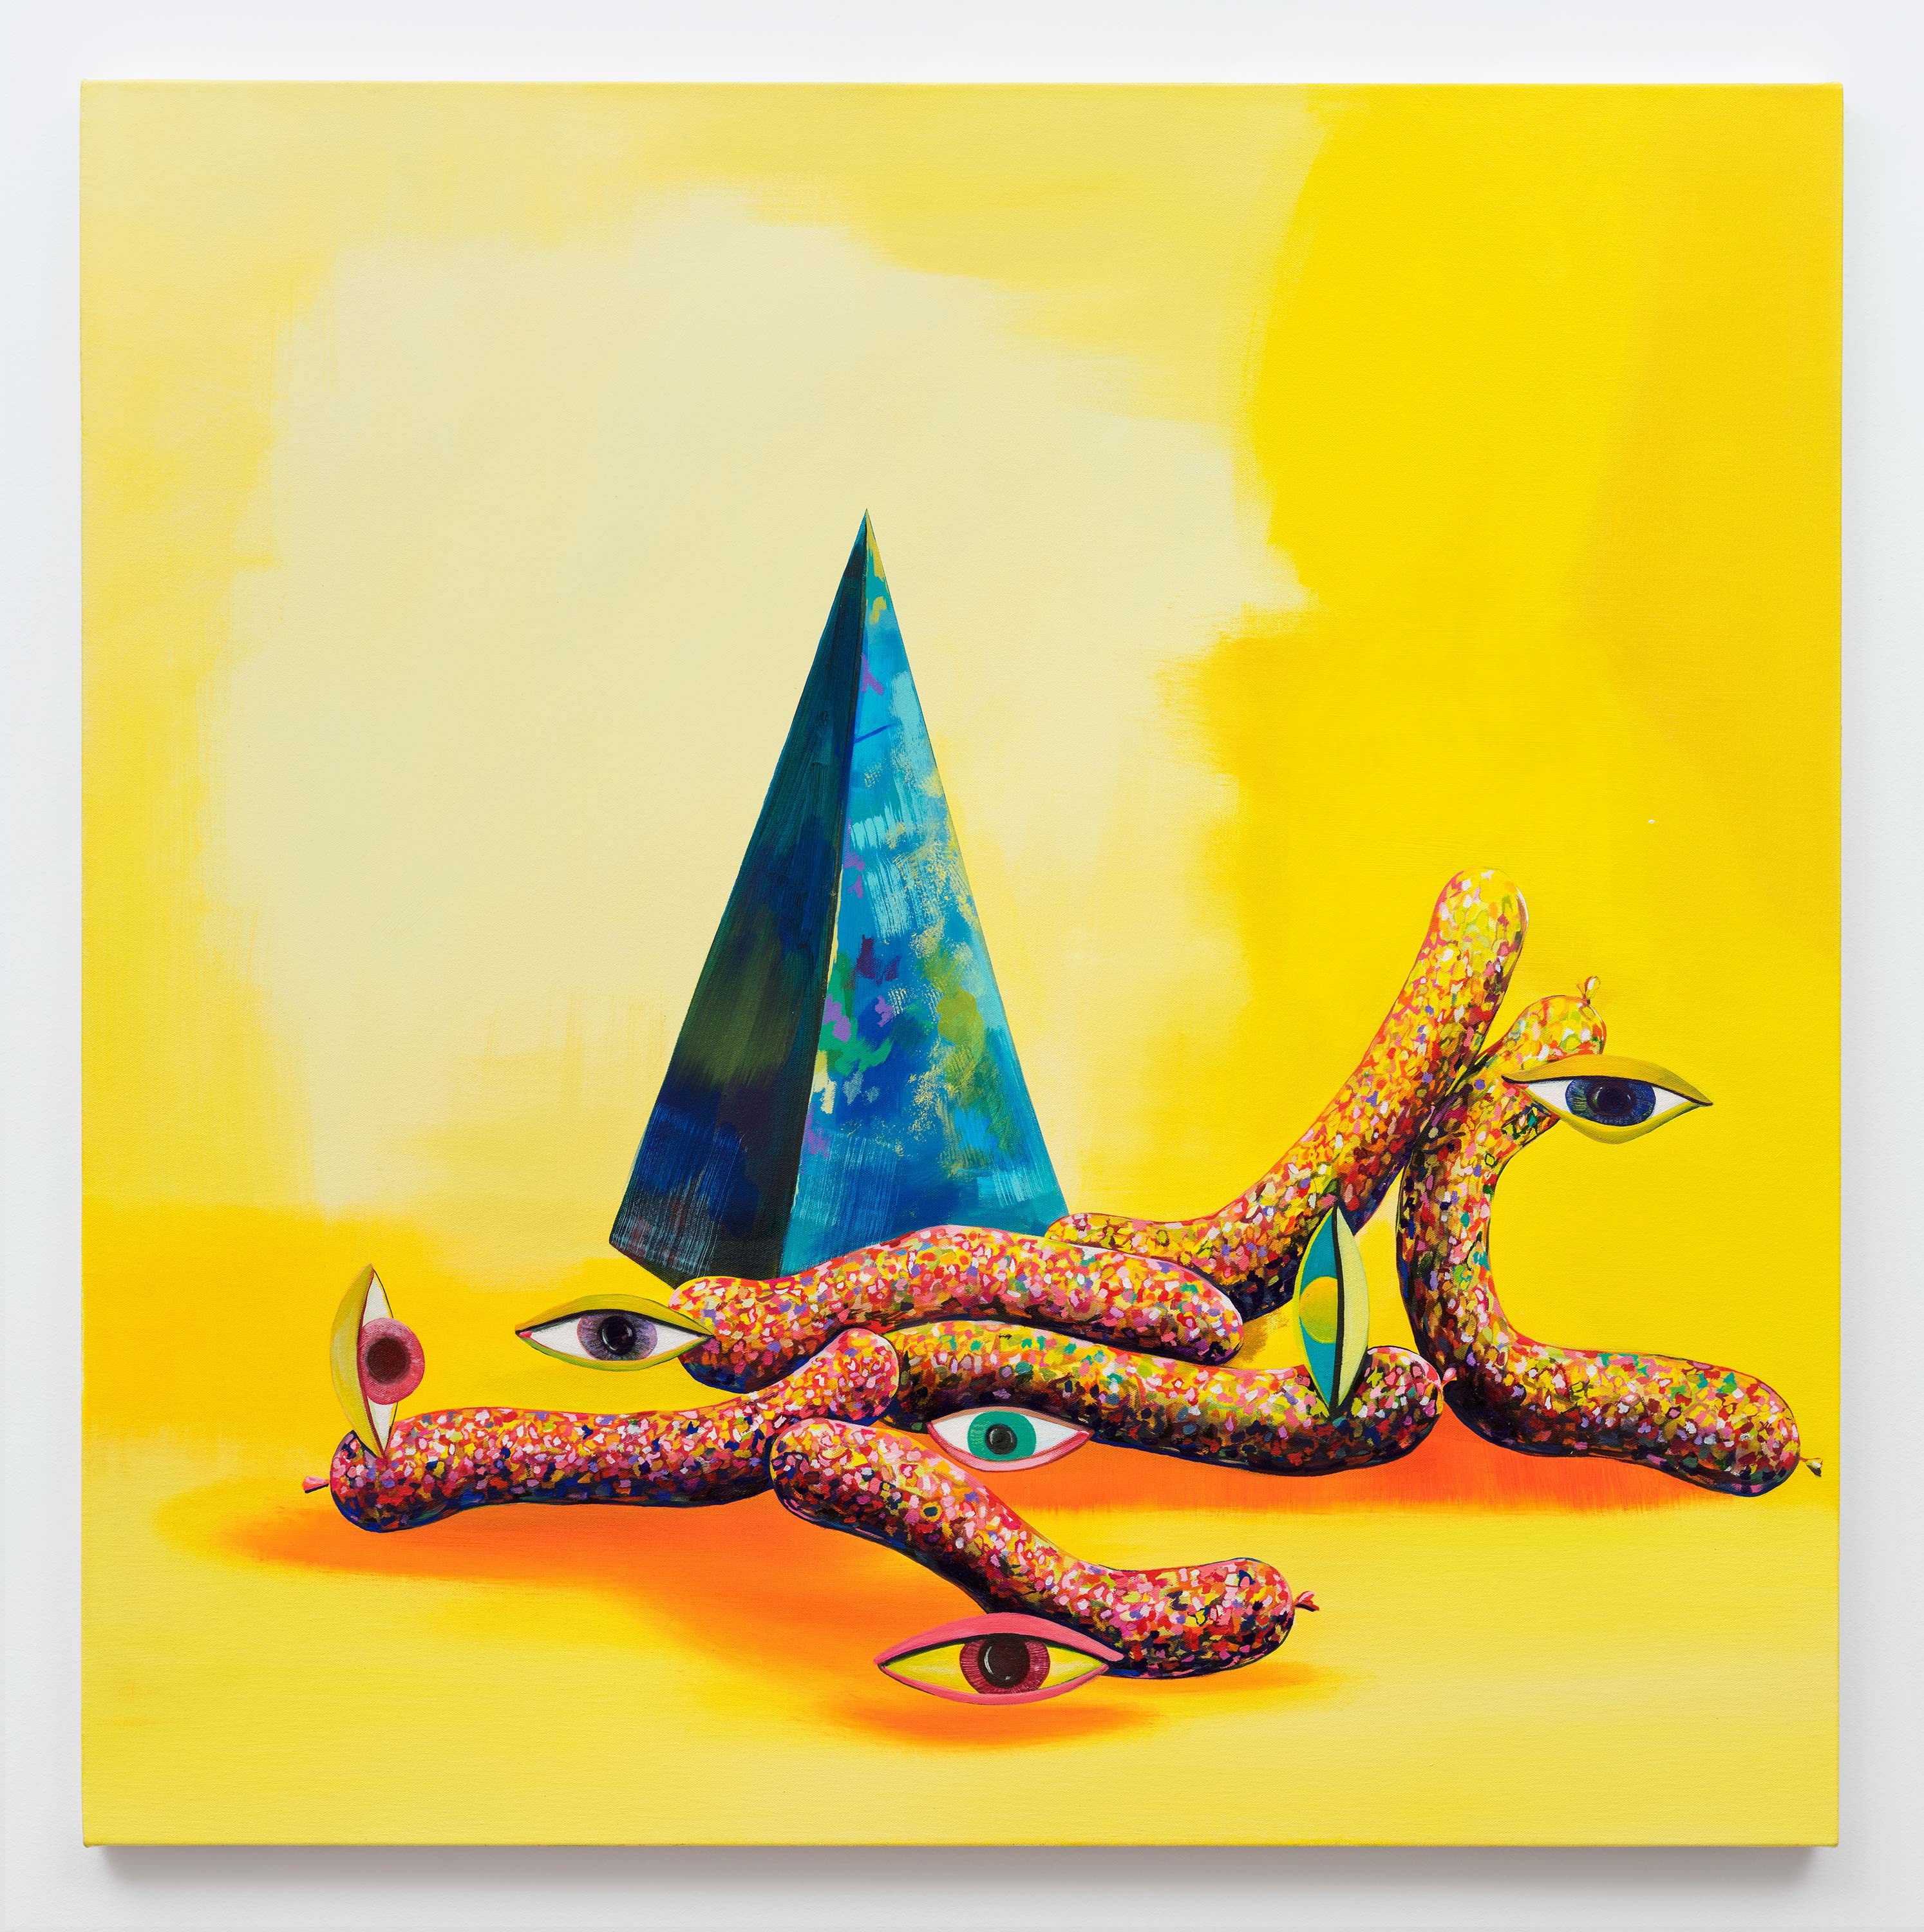 Paul Branca<br>Untitled, Sausage-yes, (Yellow)<br>2015<br>Oil on canvas<br>40 x 40 inches (101.6 x 101.6 cm)